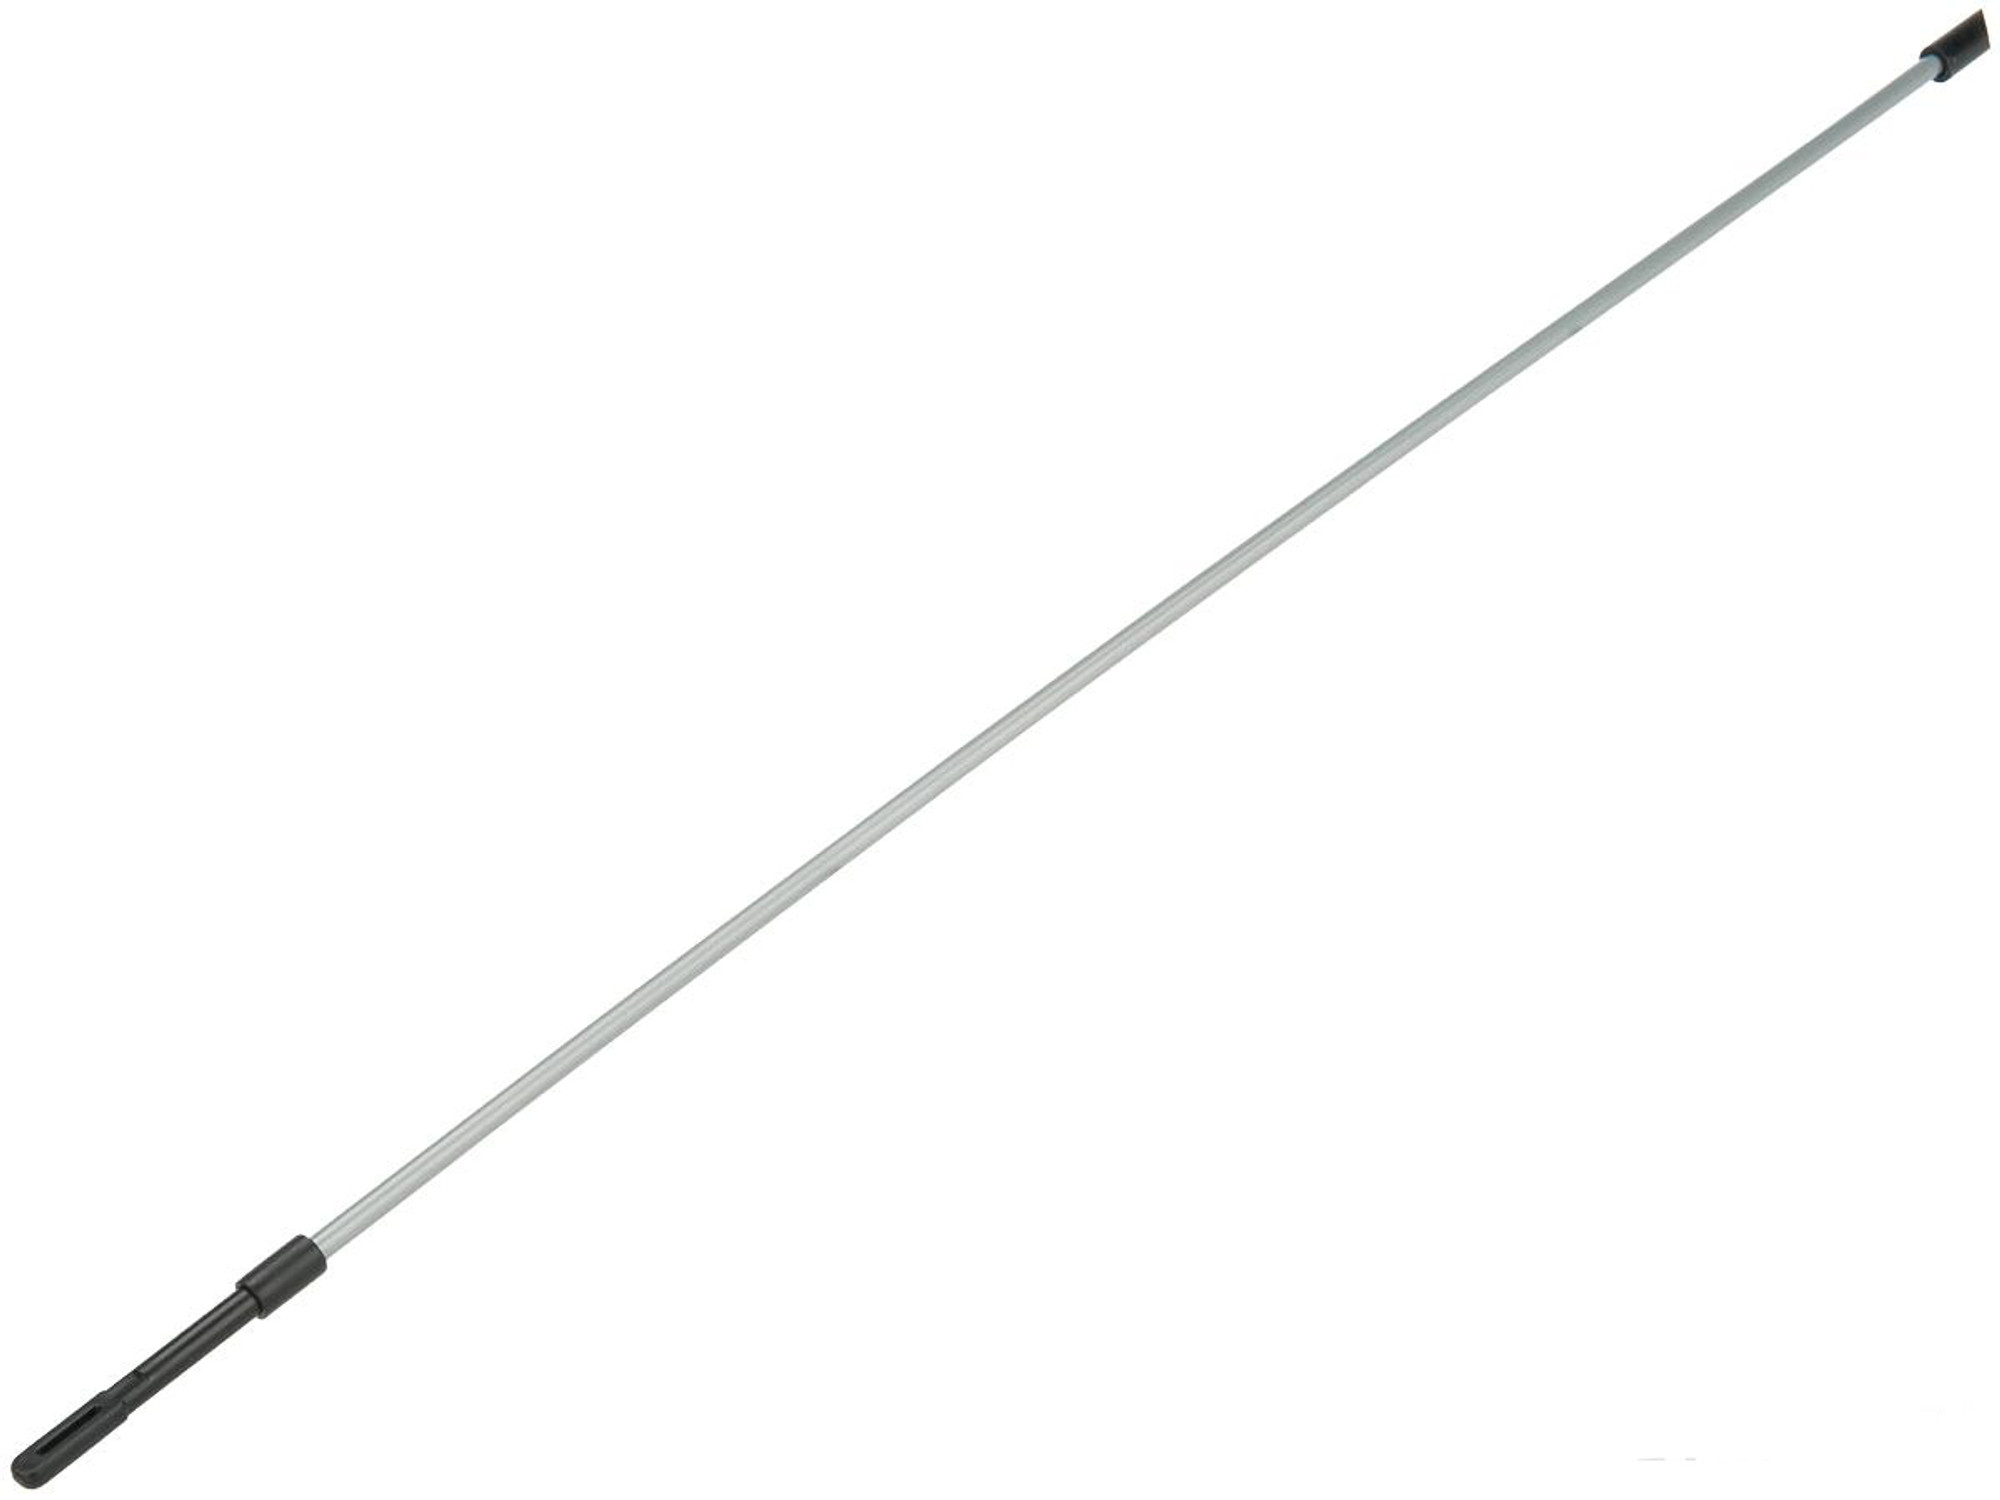 The "OLD FASHION" Airsoft Inner Barrel Cleaning Un-jamming Rod (Length: 310mm)